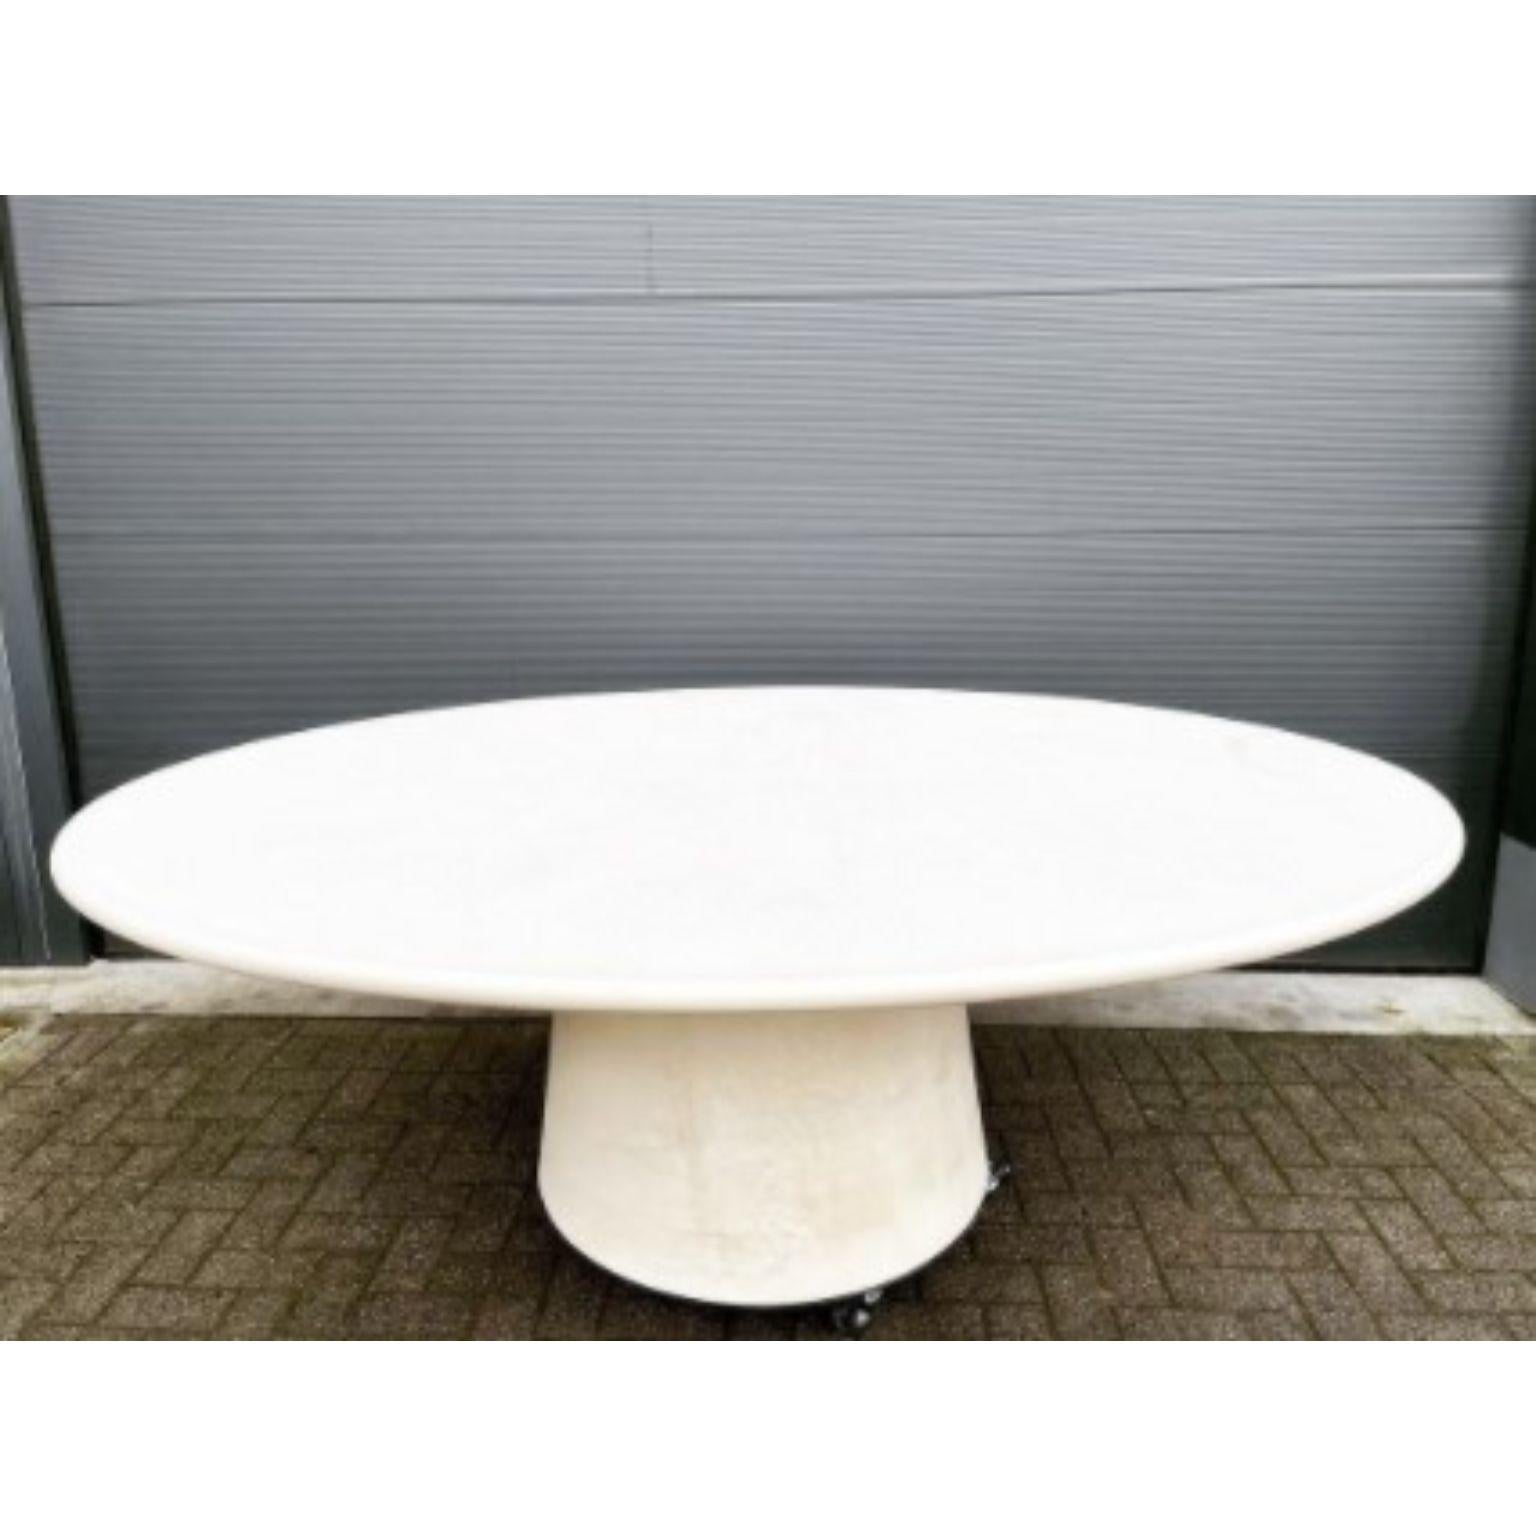 Handmade Outdoor dining table 160 by Philippe Colette
Dimensions: Ø 160 / 6 pers.
Customized height
Materials: Mineral lime plaster.

All shapes / sizes can be customized. Wide range of colors.

Our tables are in mineral lime plaster, unlike